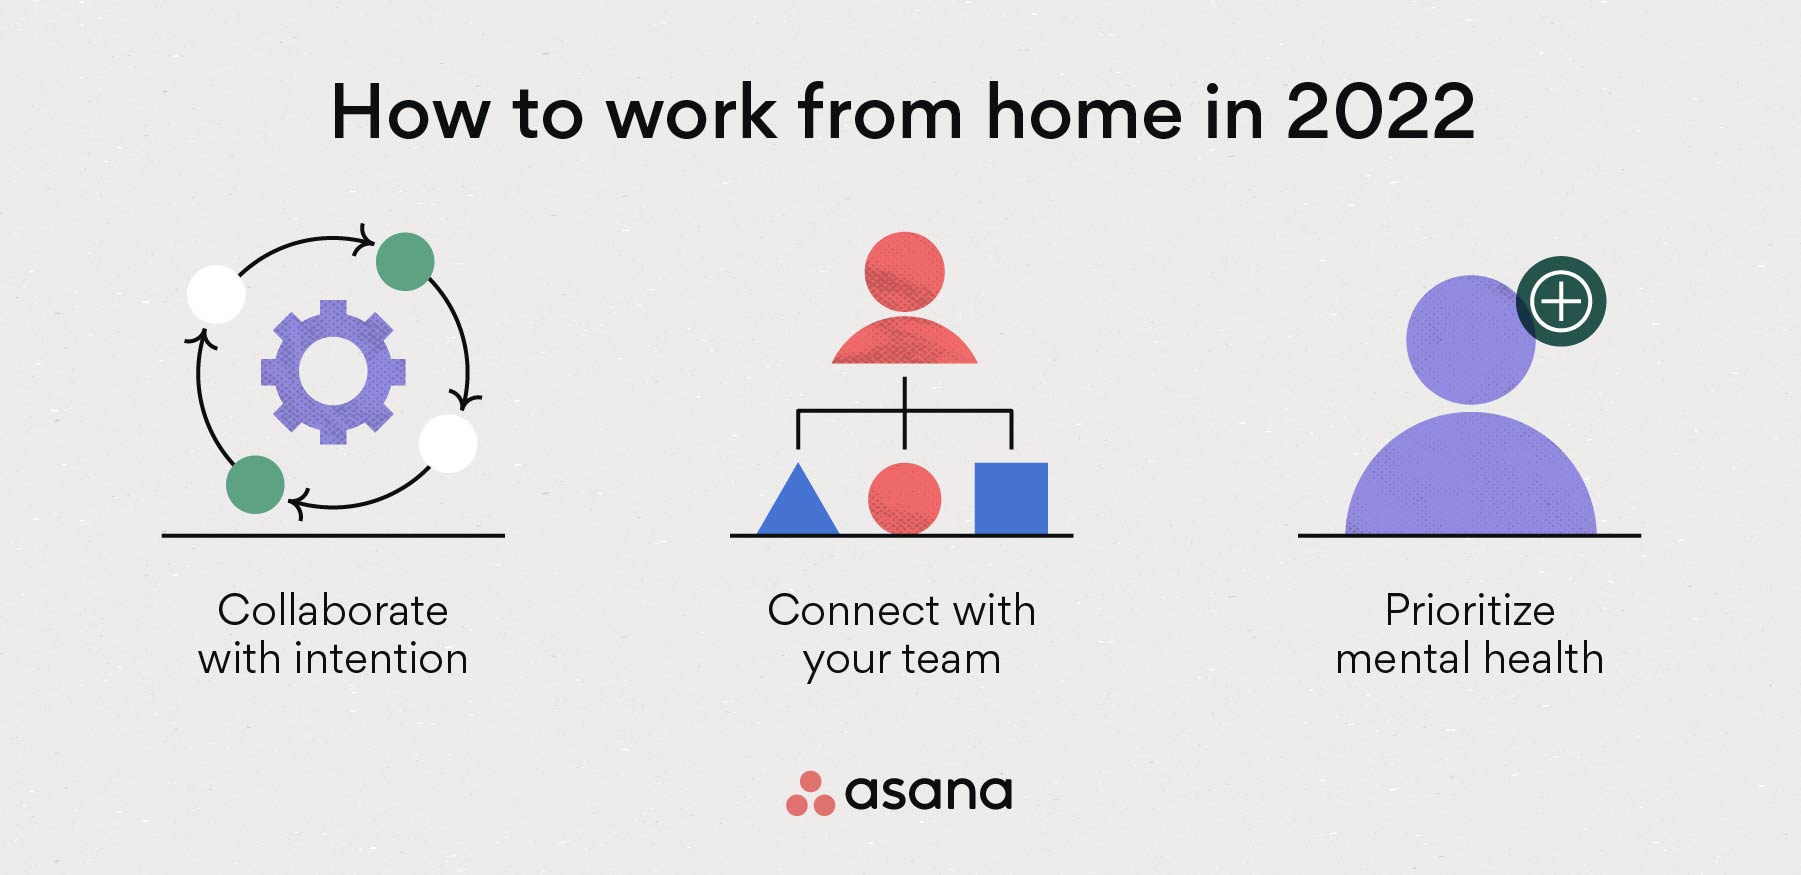 [inline illustration] How to work from home in 2022 (infographic)